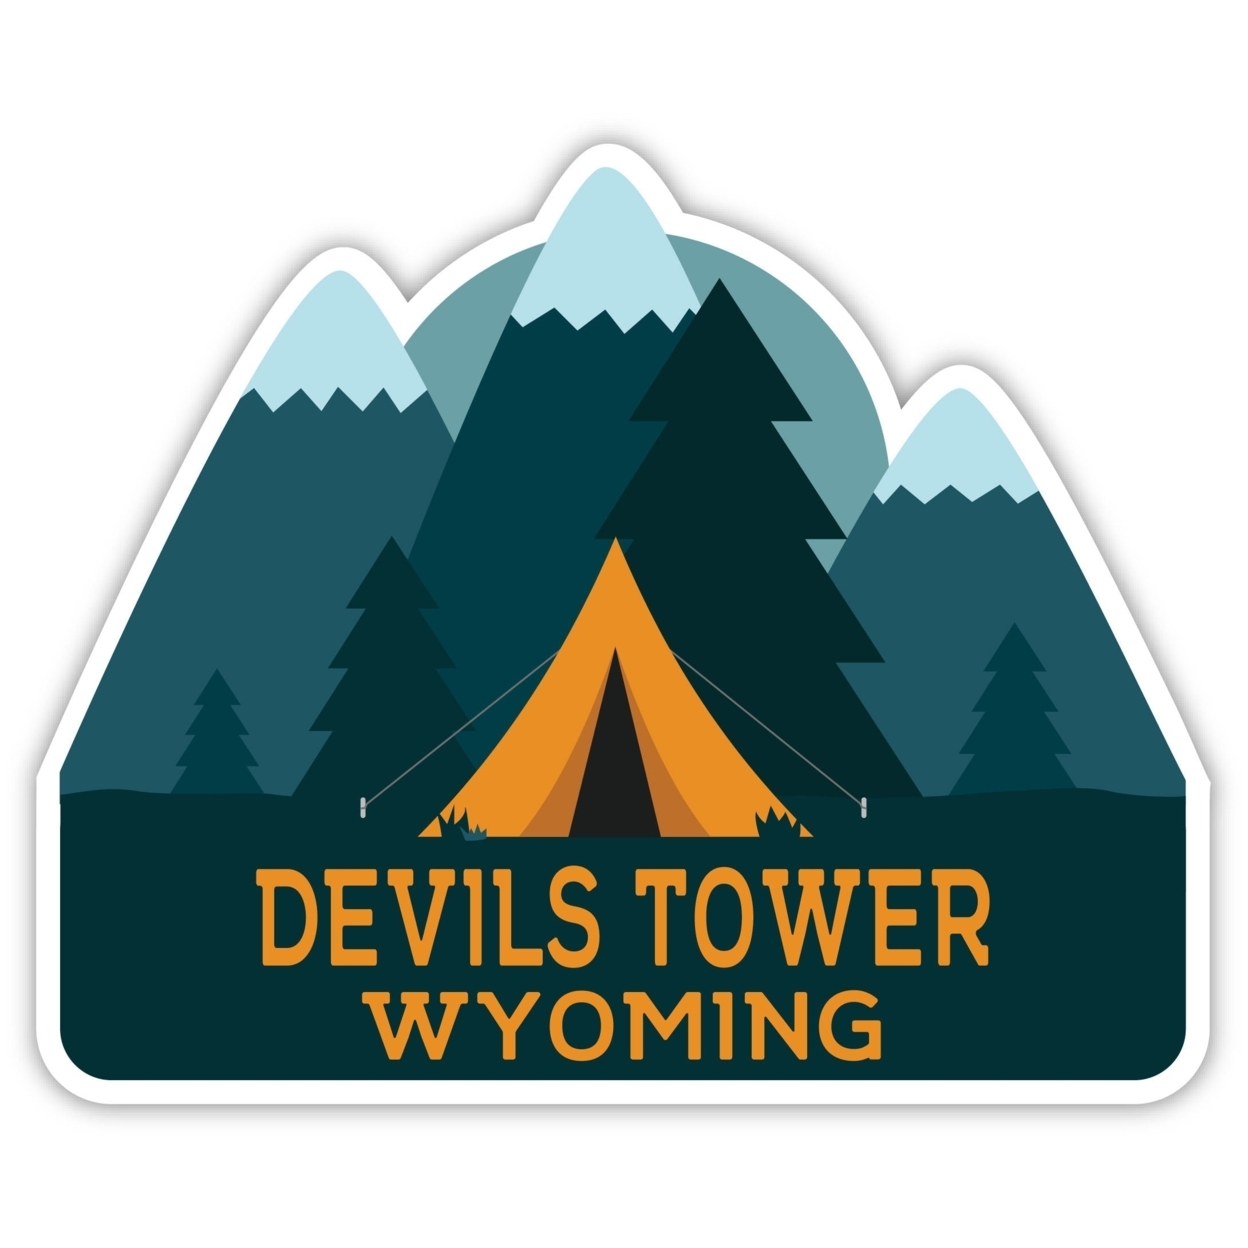 Devils Tower Wyoming Souvenir Decorative Stickers (Choose Theme And Size) - Single Unit, 12-Inch, Bear